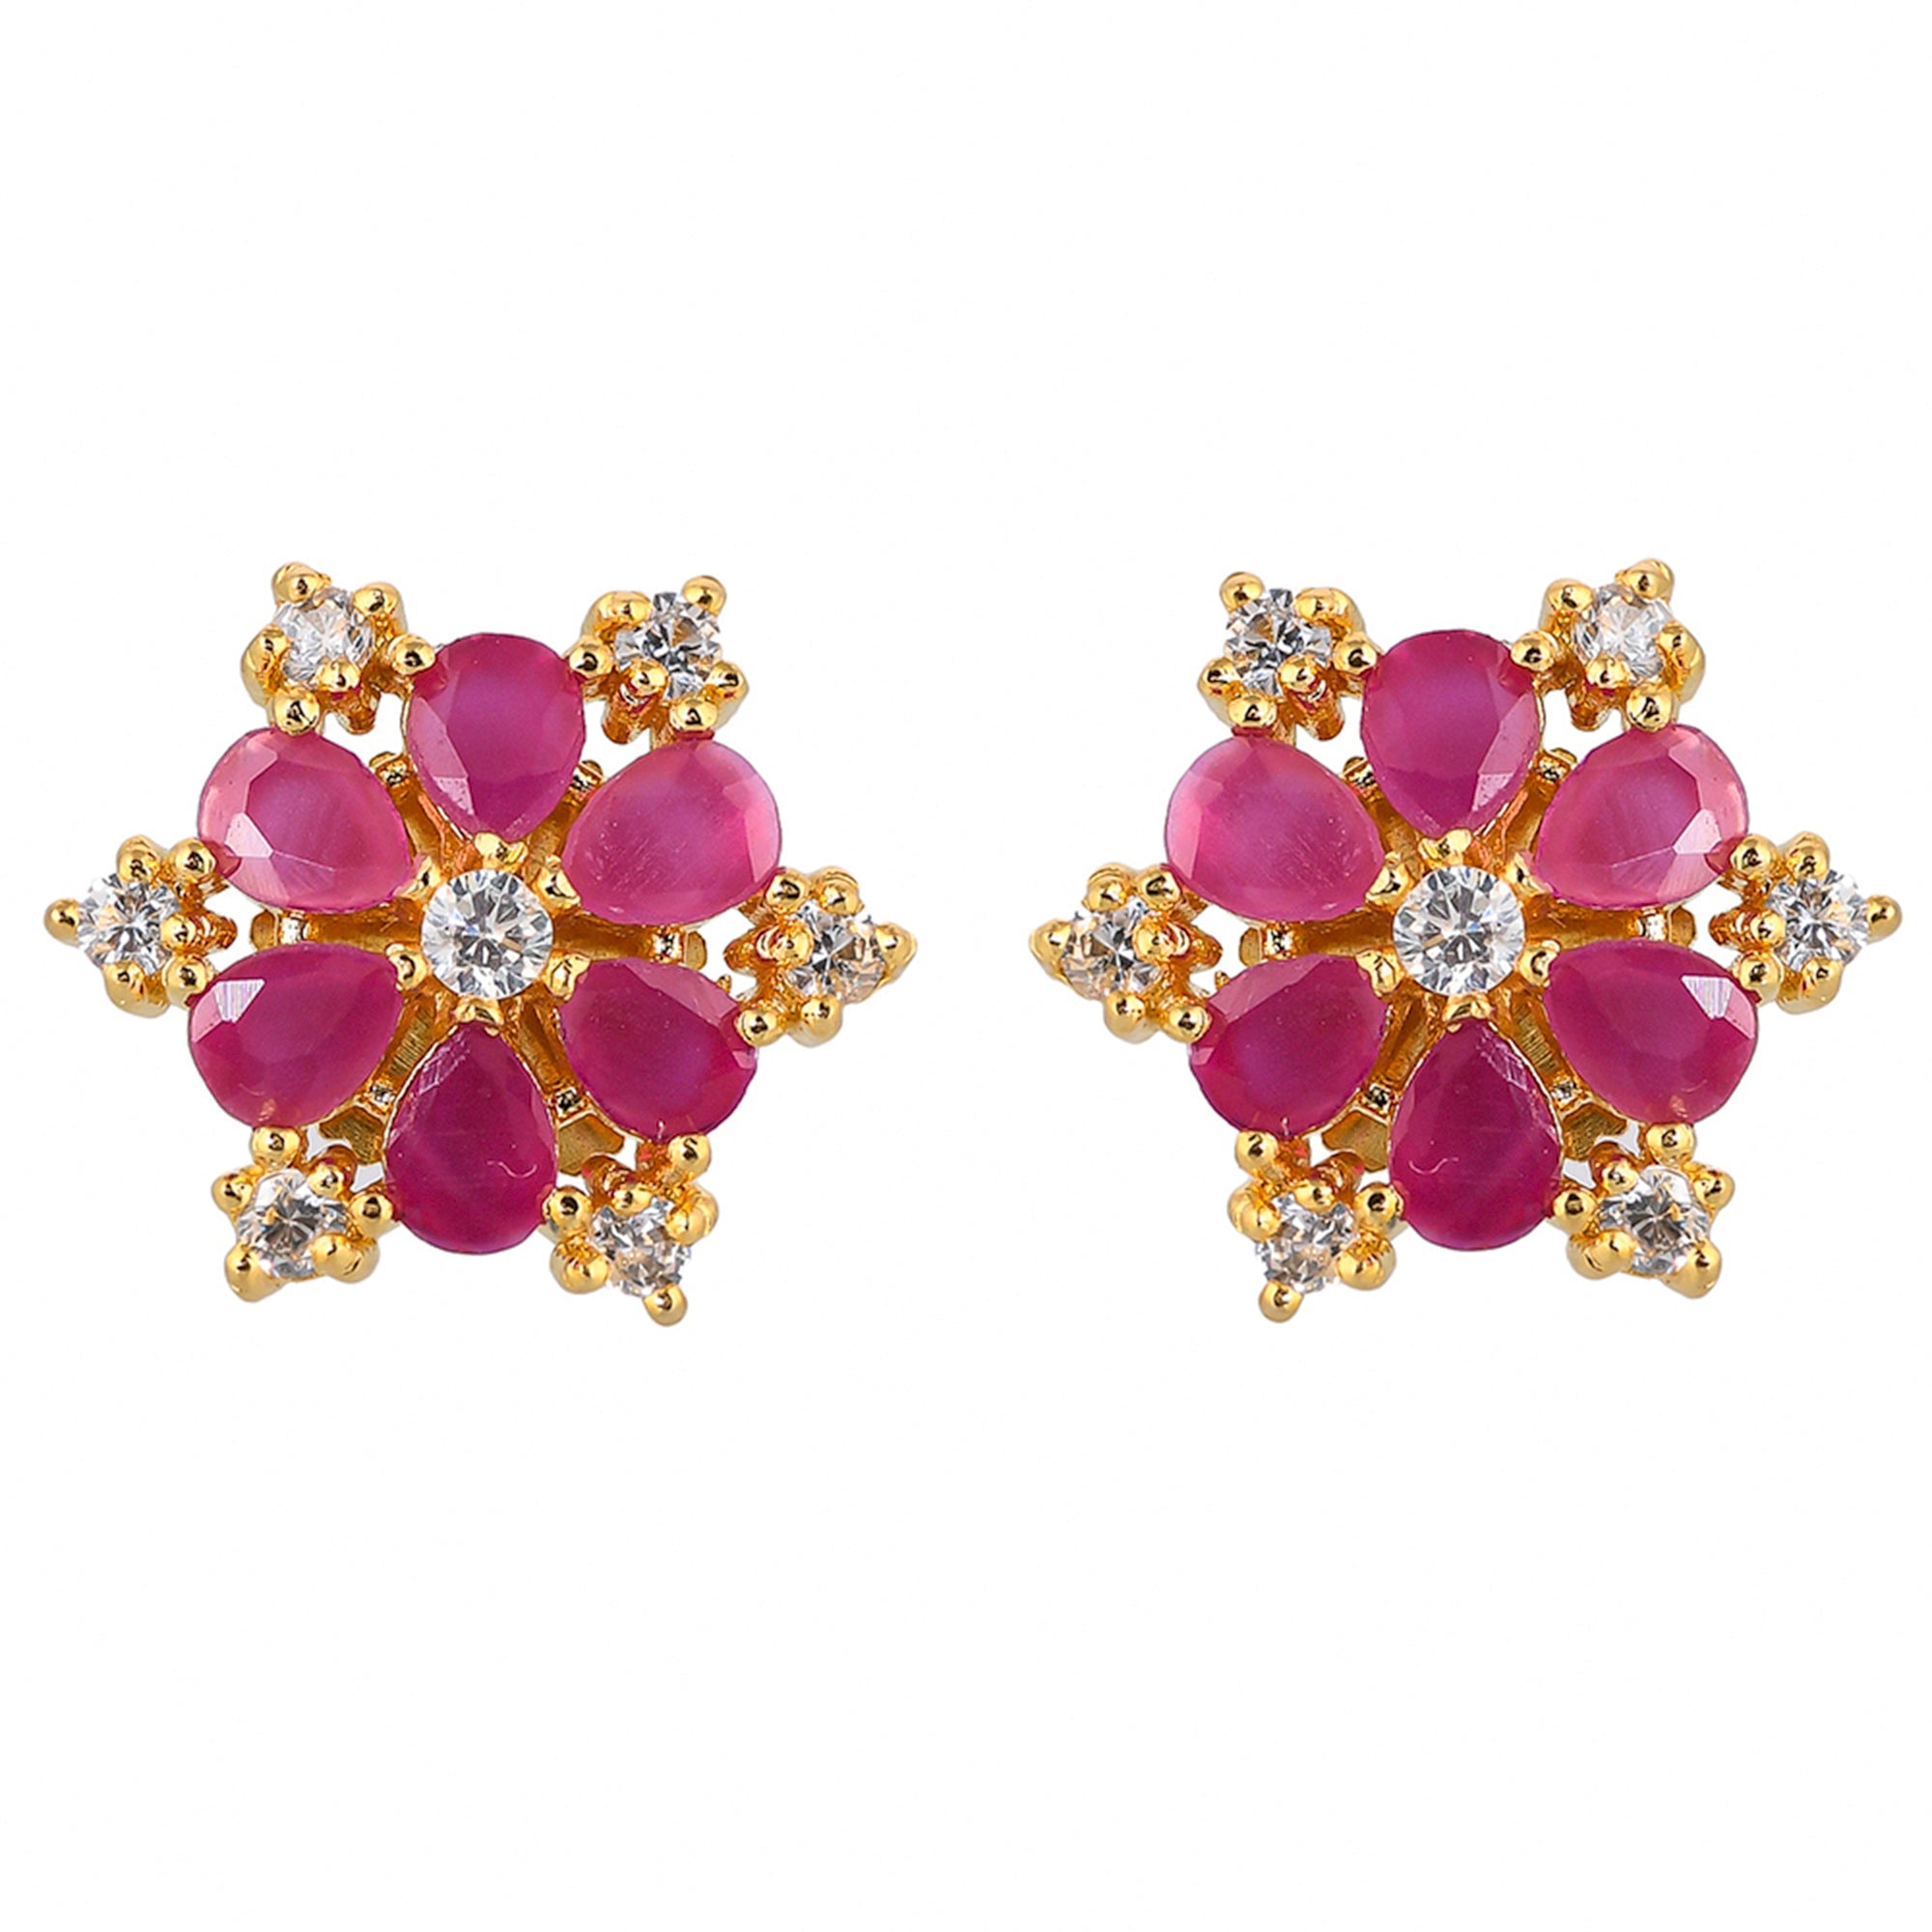 Women's Teardrop And Round Cut Pink And White Cz Gems Stud Earrings - Voylla